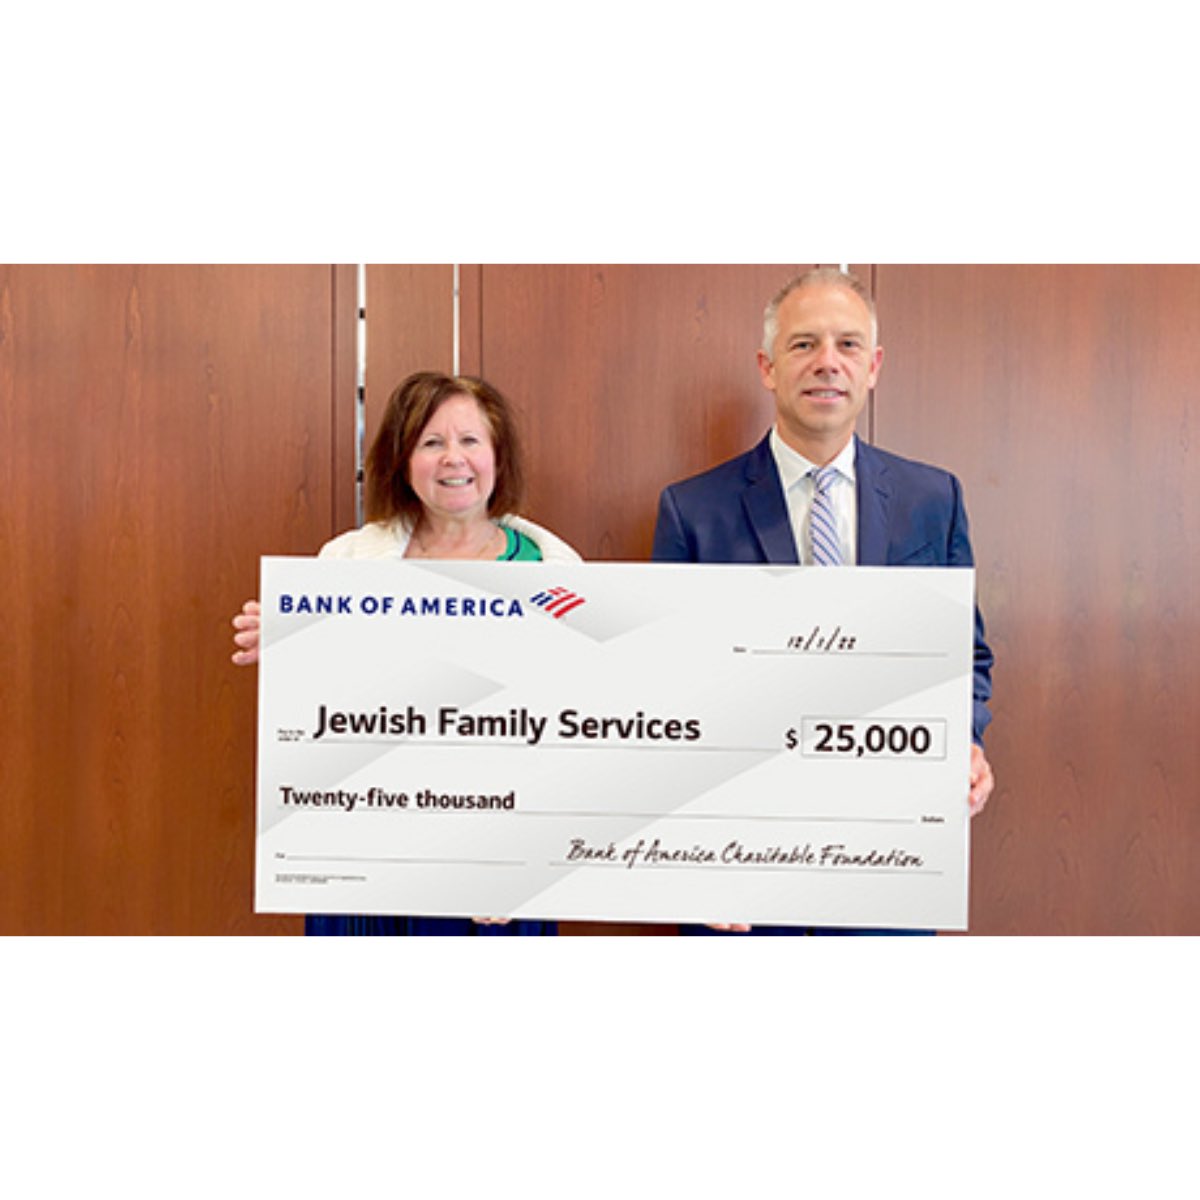 Excited to share that through the @BankofAmerica employee booster campaign, we have donated $25,000 to @JFSKC to help provide essential human services, regardless of faith, age, culture, or lifestyle! #BofAGrants #BoosterCampaign